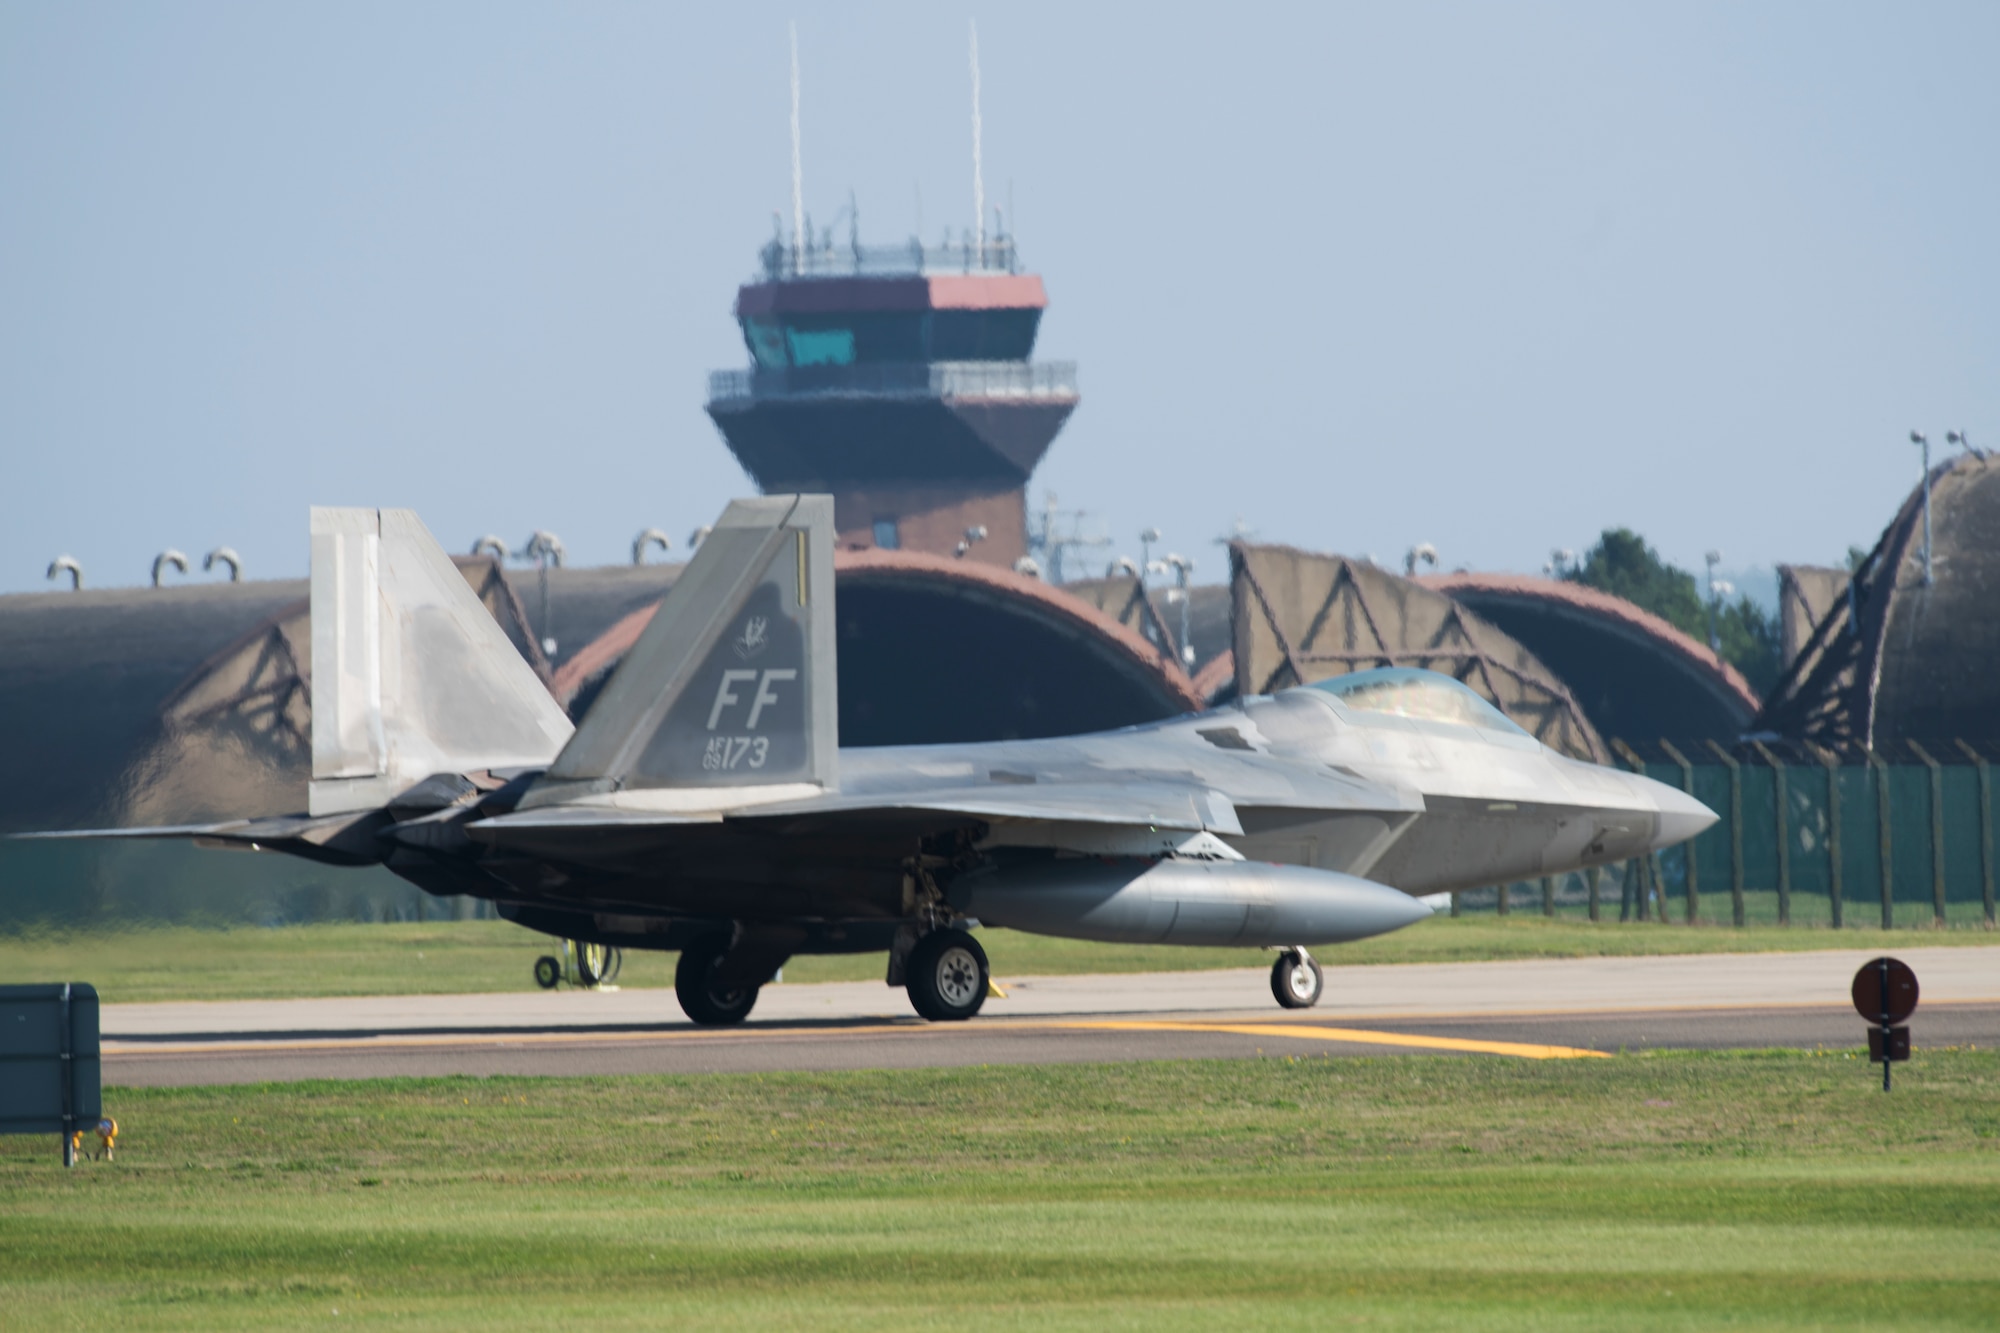 An F-22 Raptor assigned to the 1st Fighter Wing, Joint Base Langley-Eustis, Va., taxis down the flightline at Royal Air Force Lakenheath, England, Oct. 5, 2018. As the world’s premiere operational 5th-generation fighter, the Raptor’s unique combination of stealth, speed, agility and situational awareness combined with lethal long-range air-to-air and air-to-ground weaponry make it the best air dominance fighter in the world. (U.S. Air Force photo/Airman First Class Christopher Sparks)